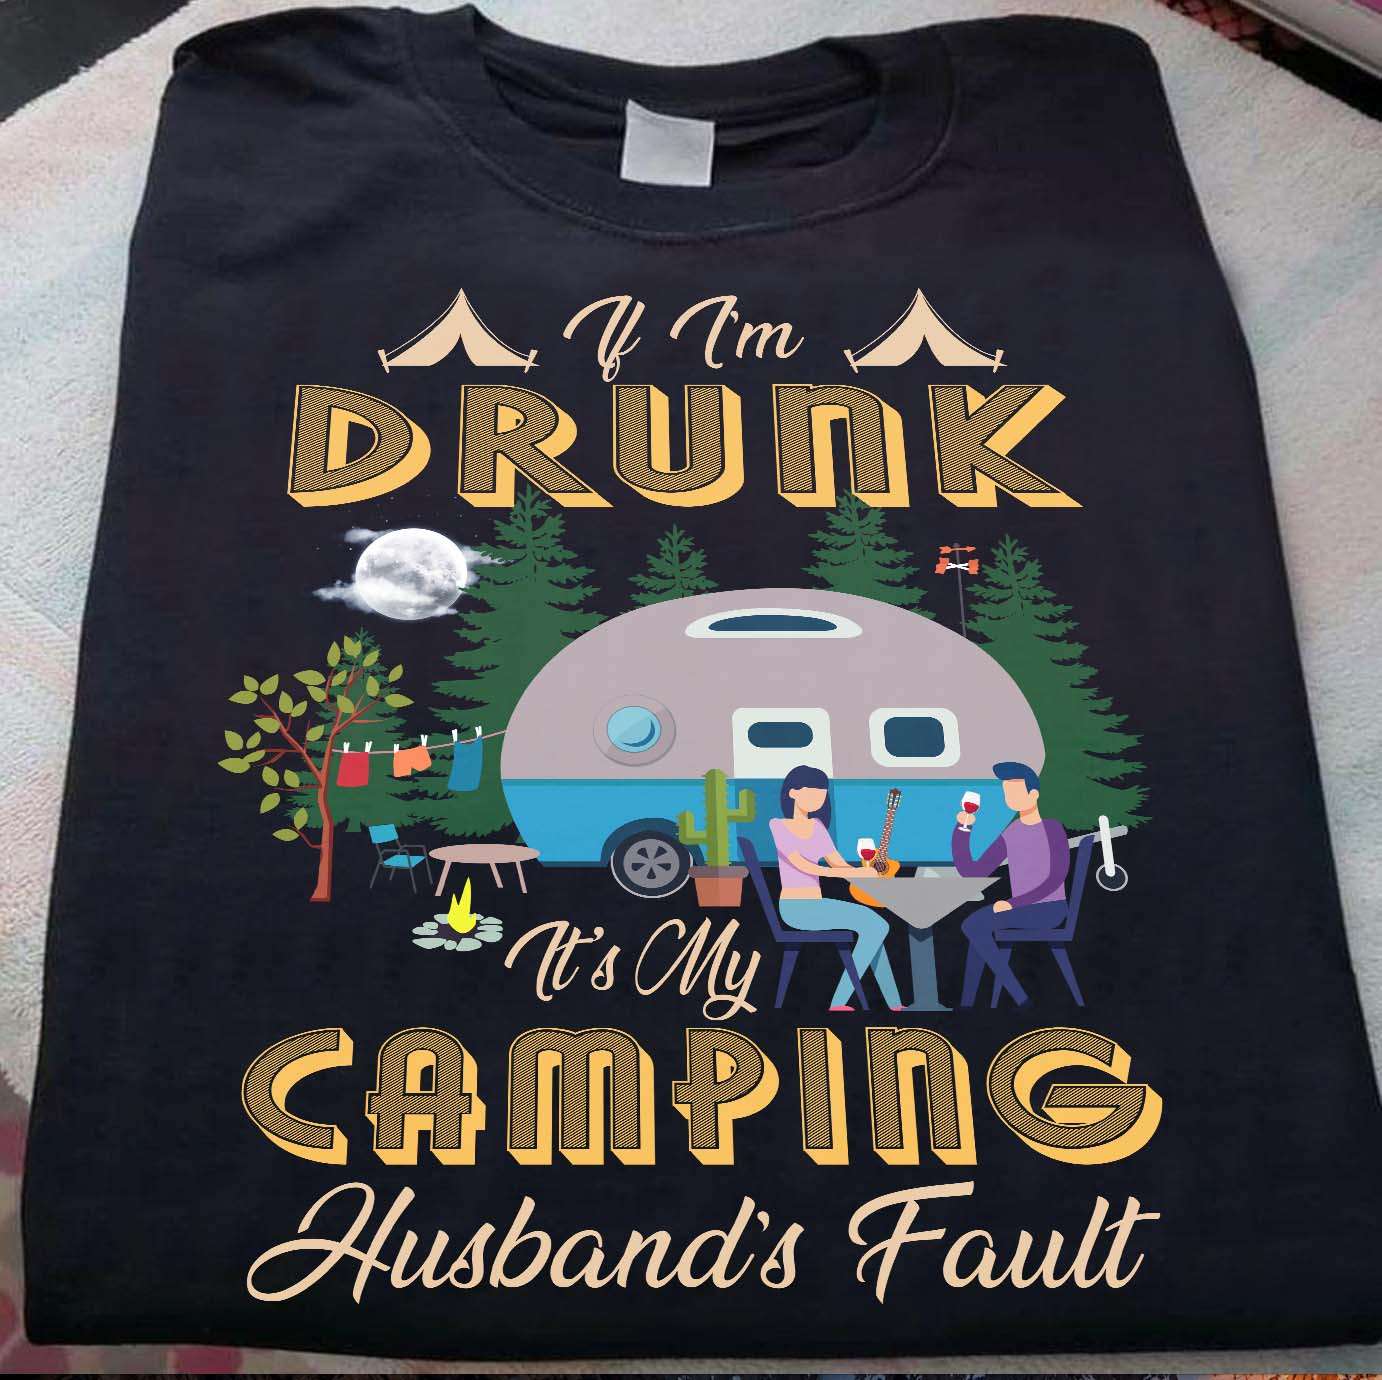 If I'm drunk It's my camping husband's fault - Husband and wife, camping partners for life